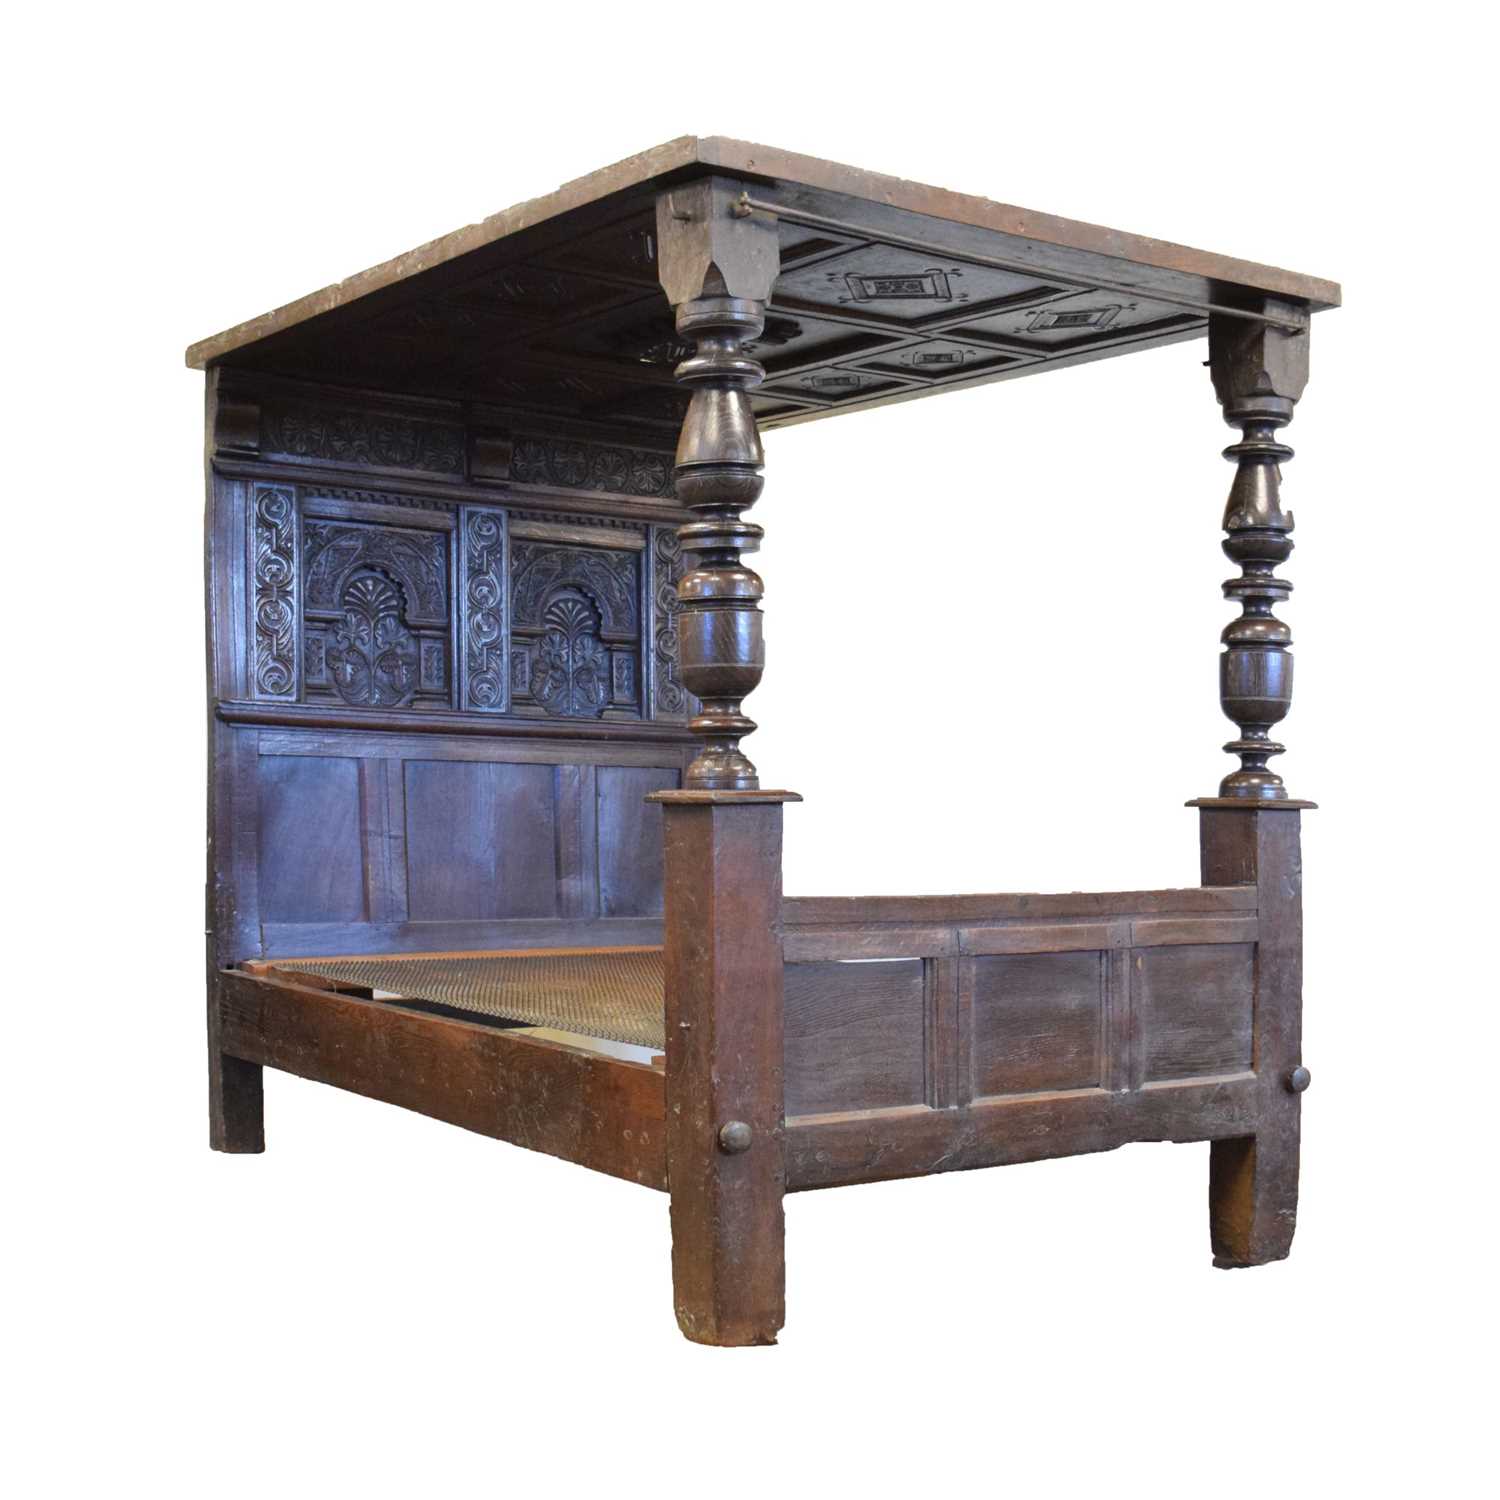 The Aldwick Court carved oak tester bed